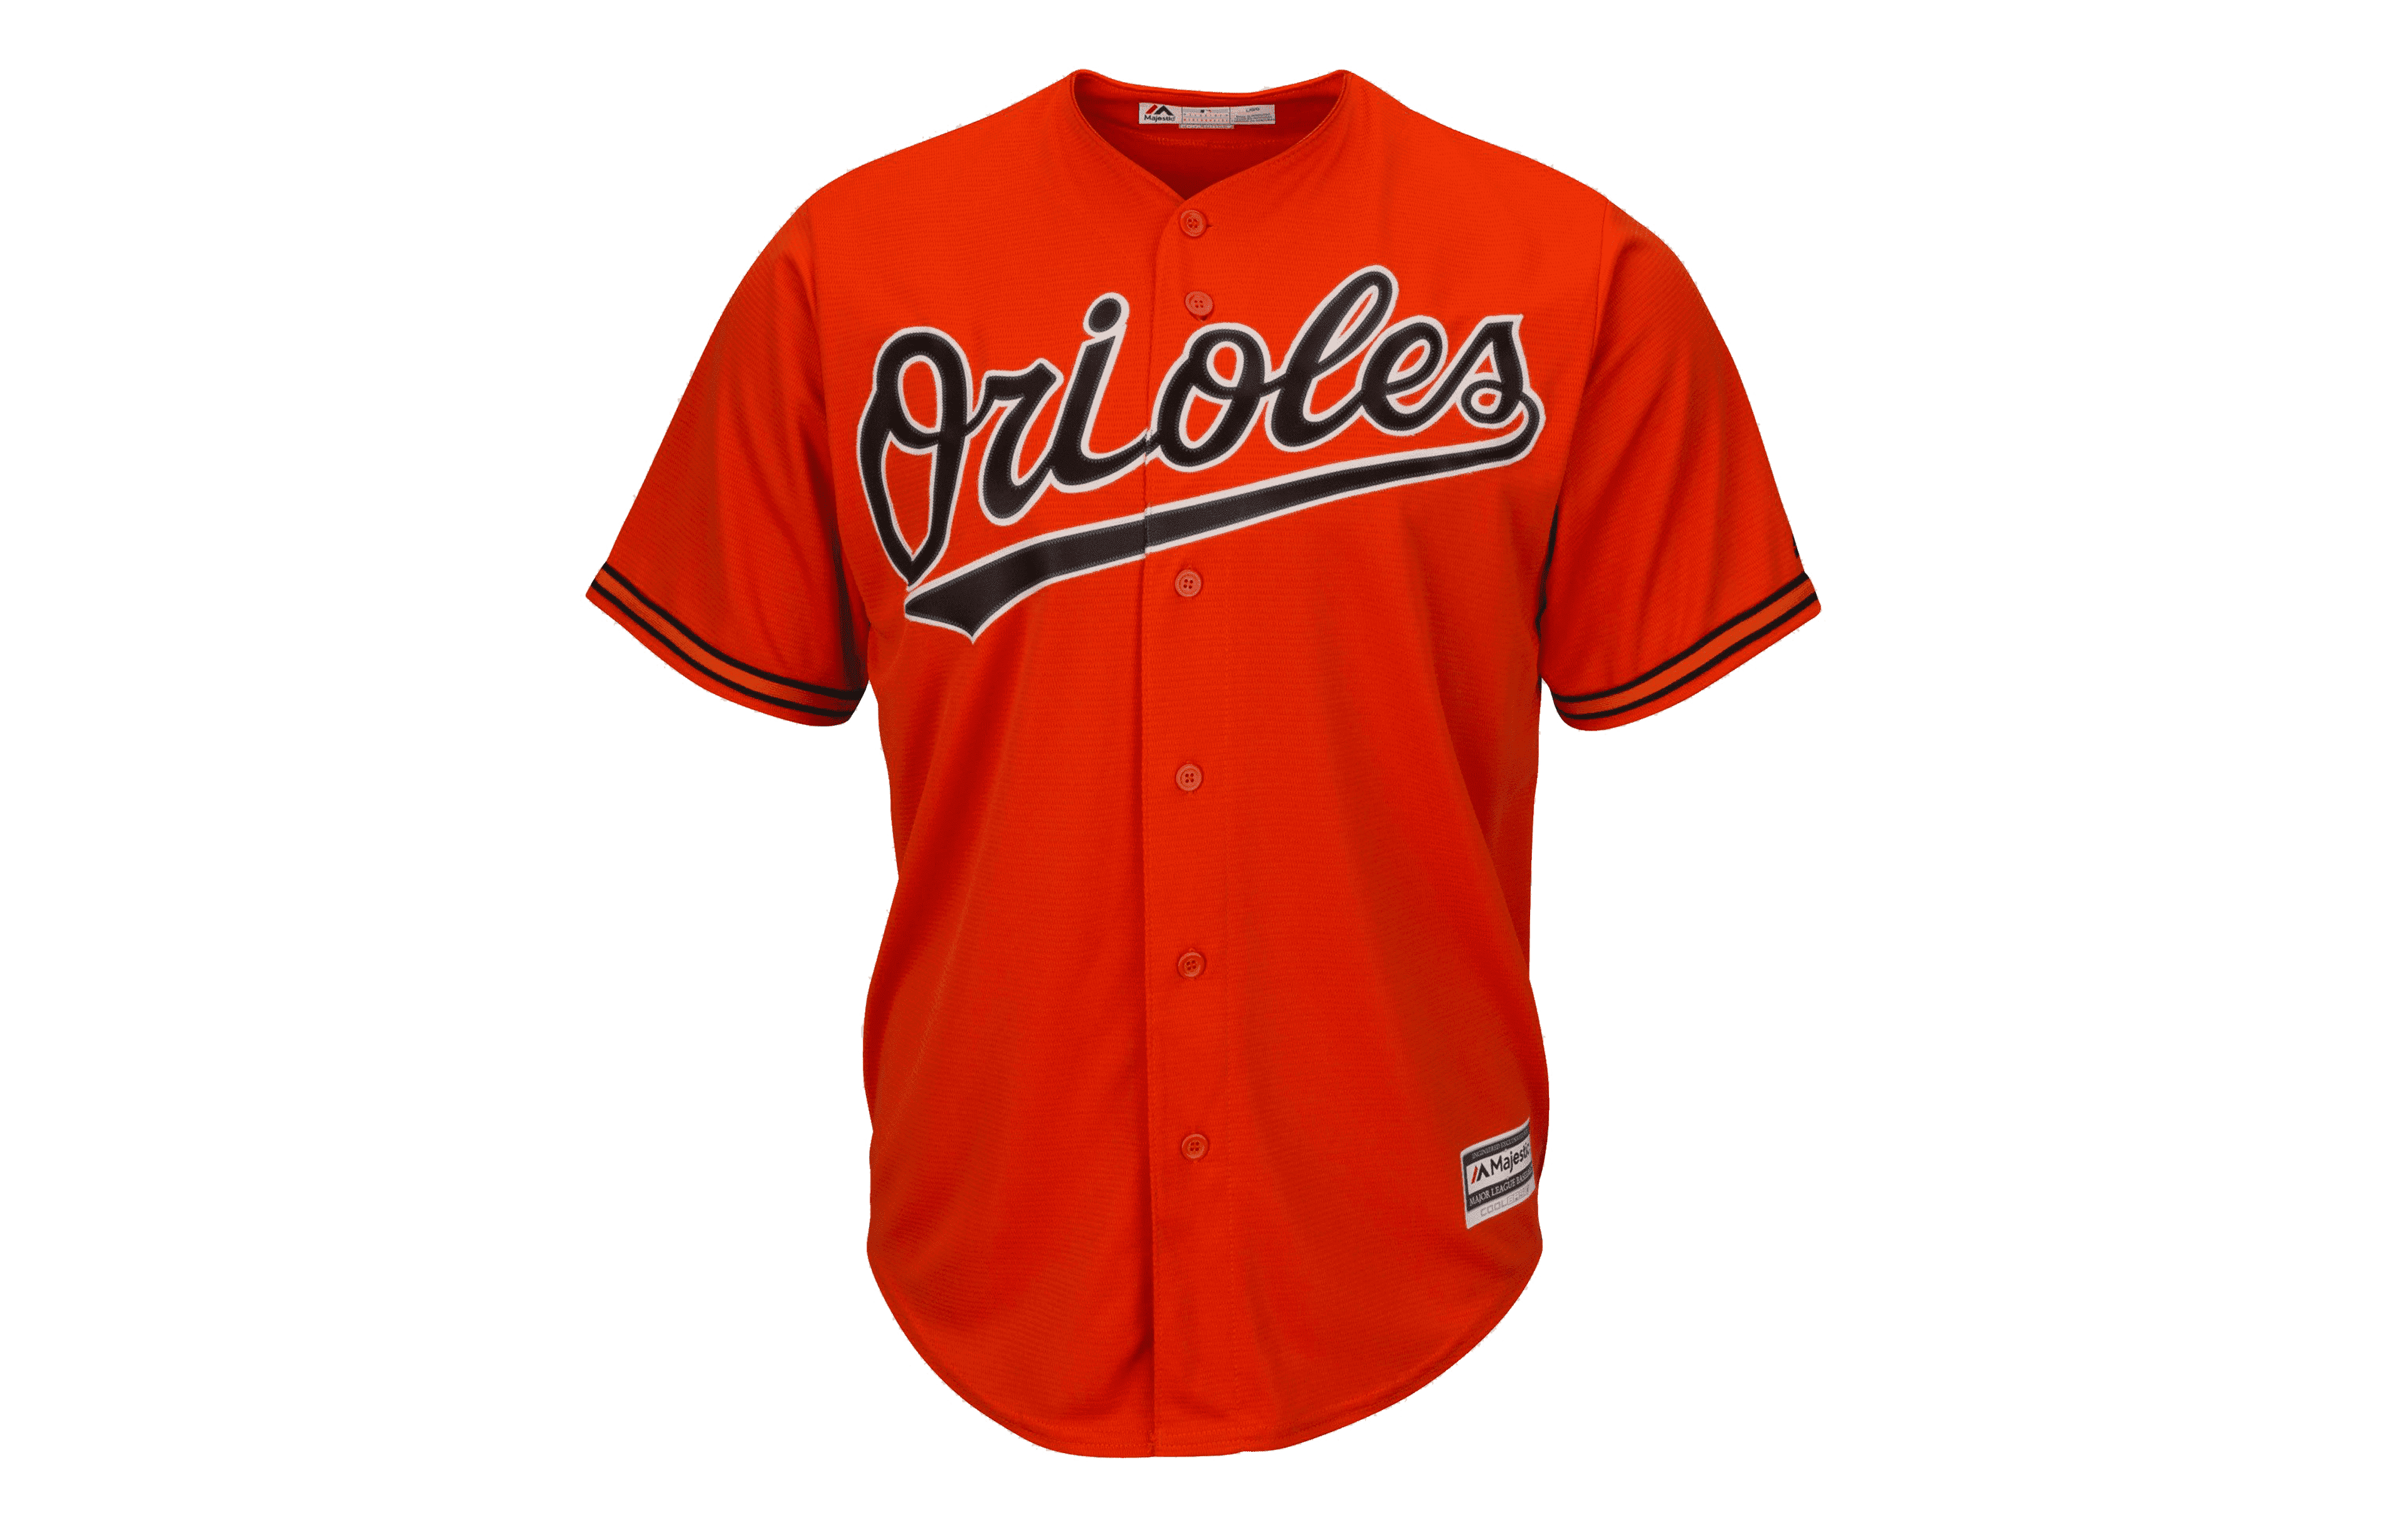 MLB: The Best and Worst Uniforms/Logos